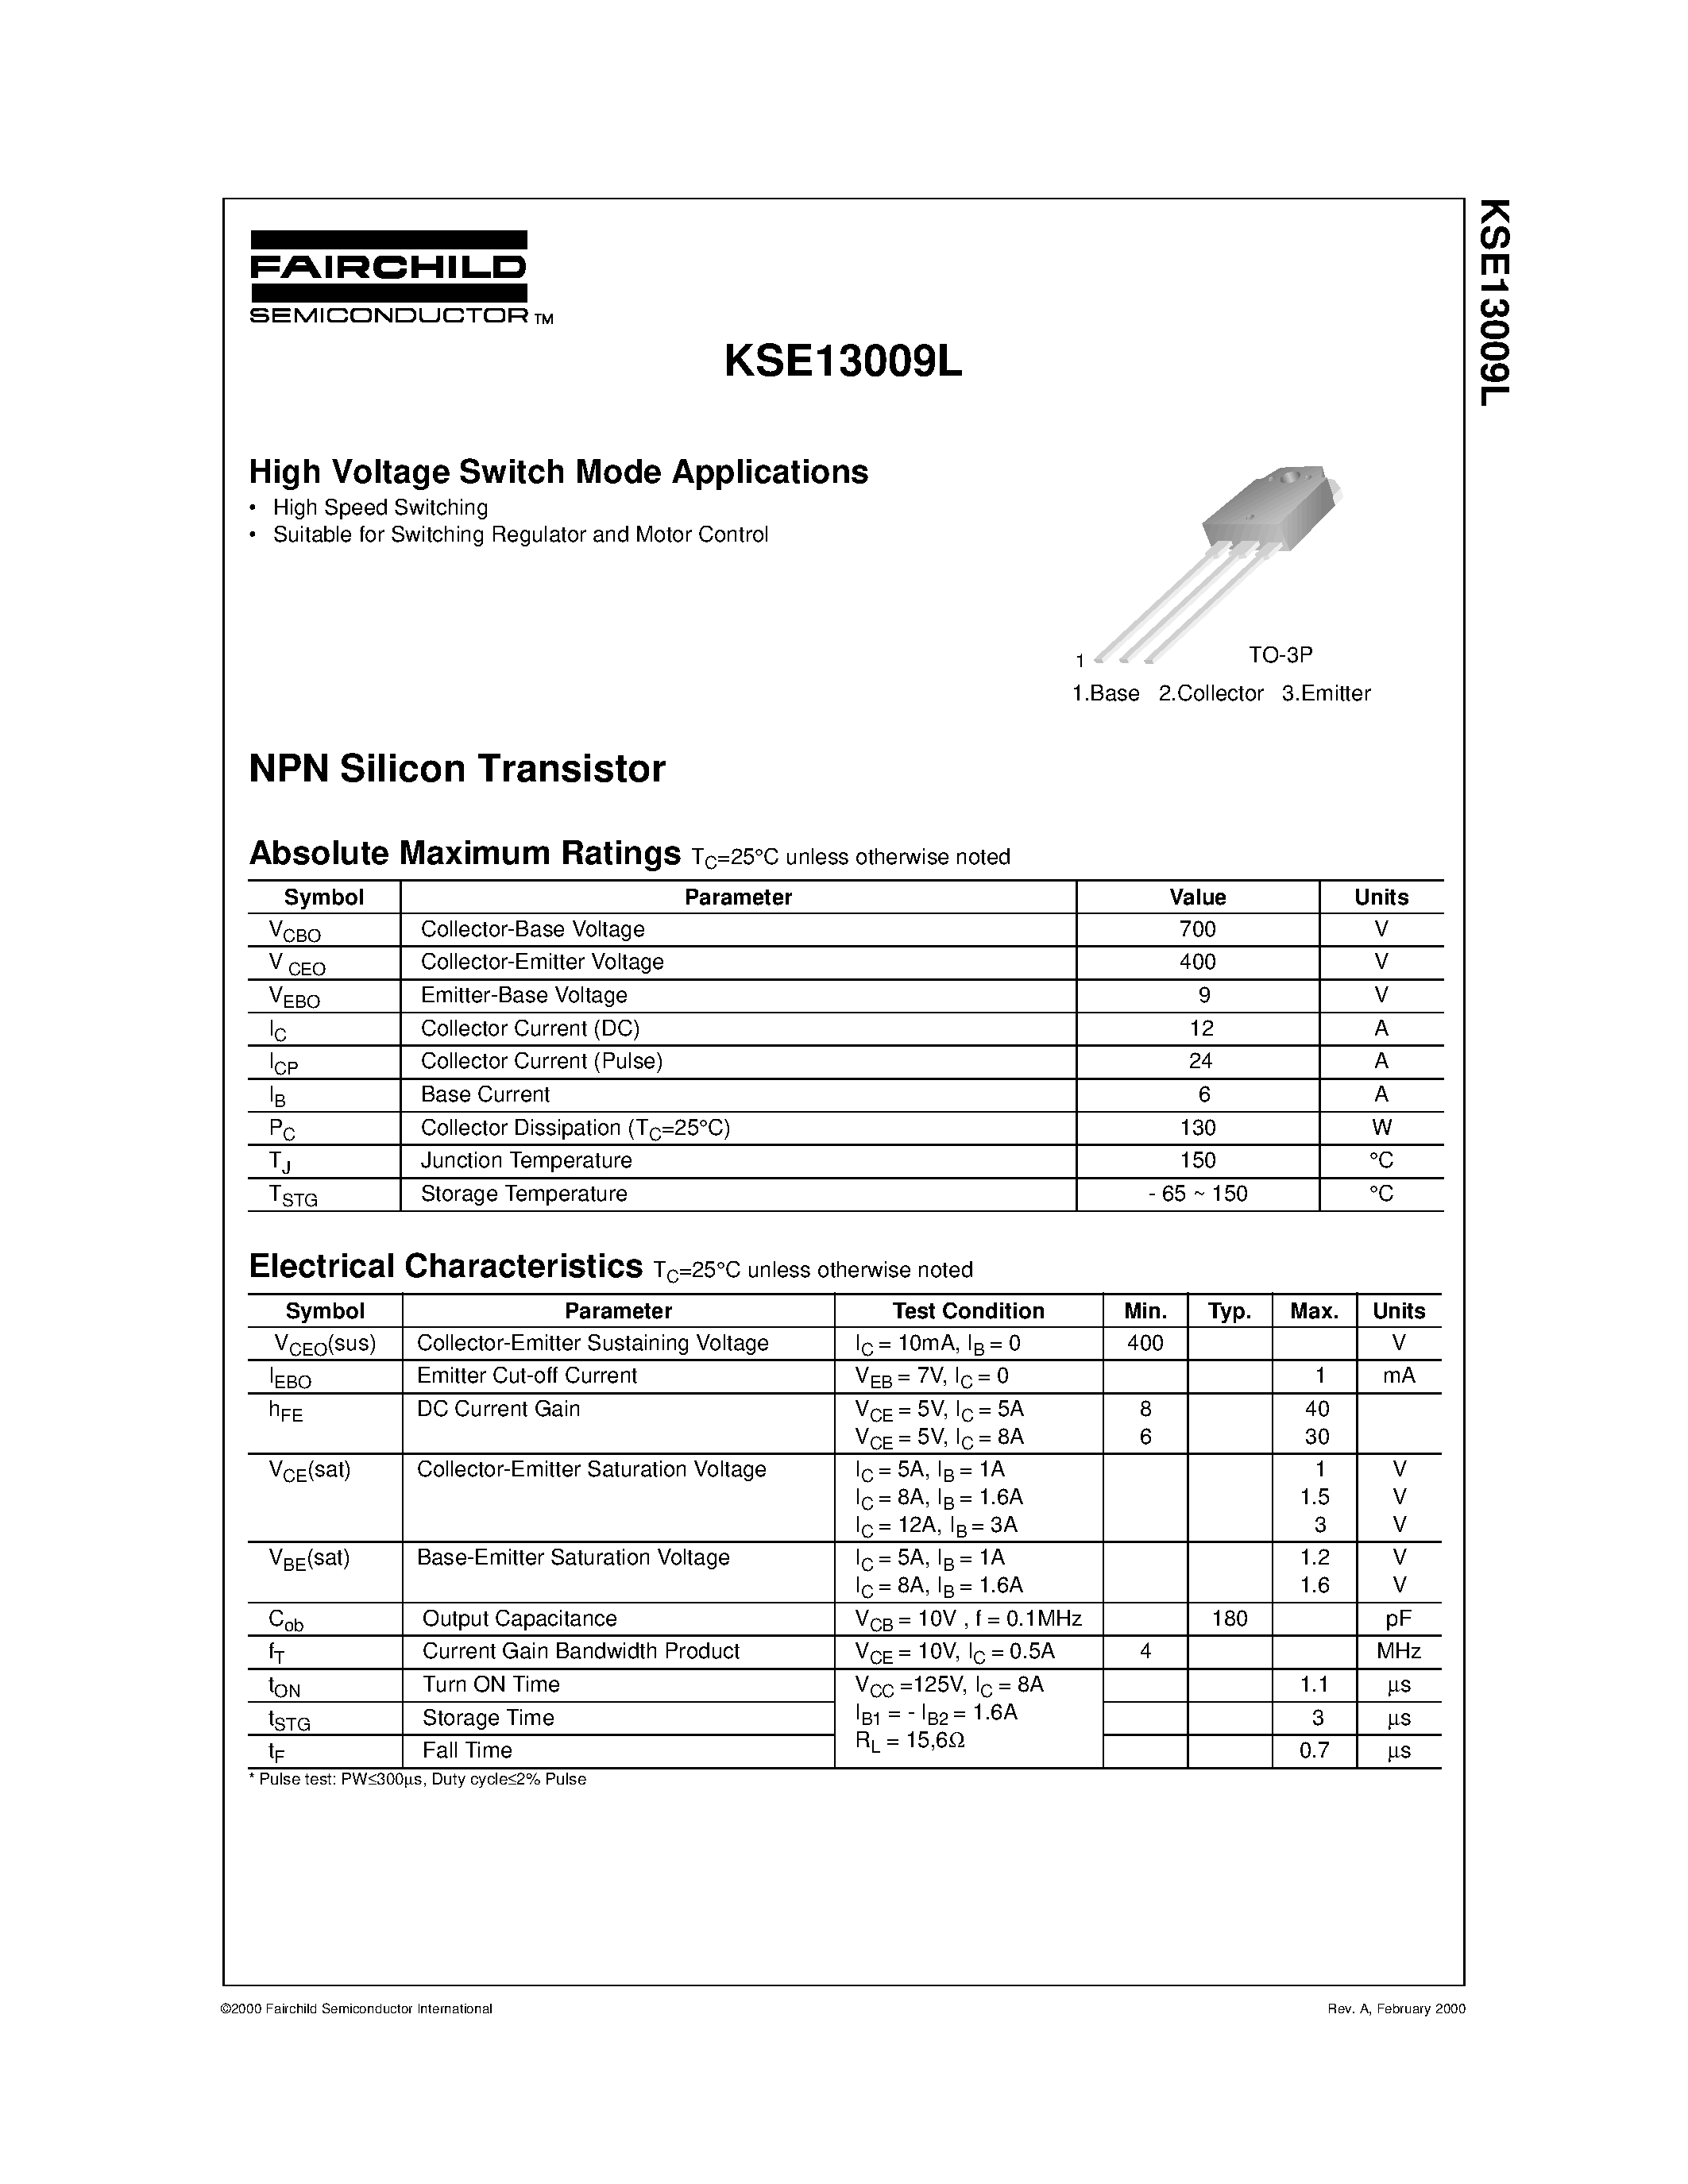 Datasheet KSE13009L - High Voltage Switch Mode Applications page 1